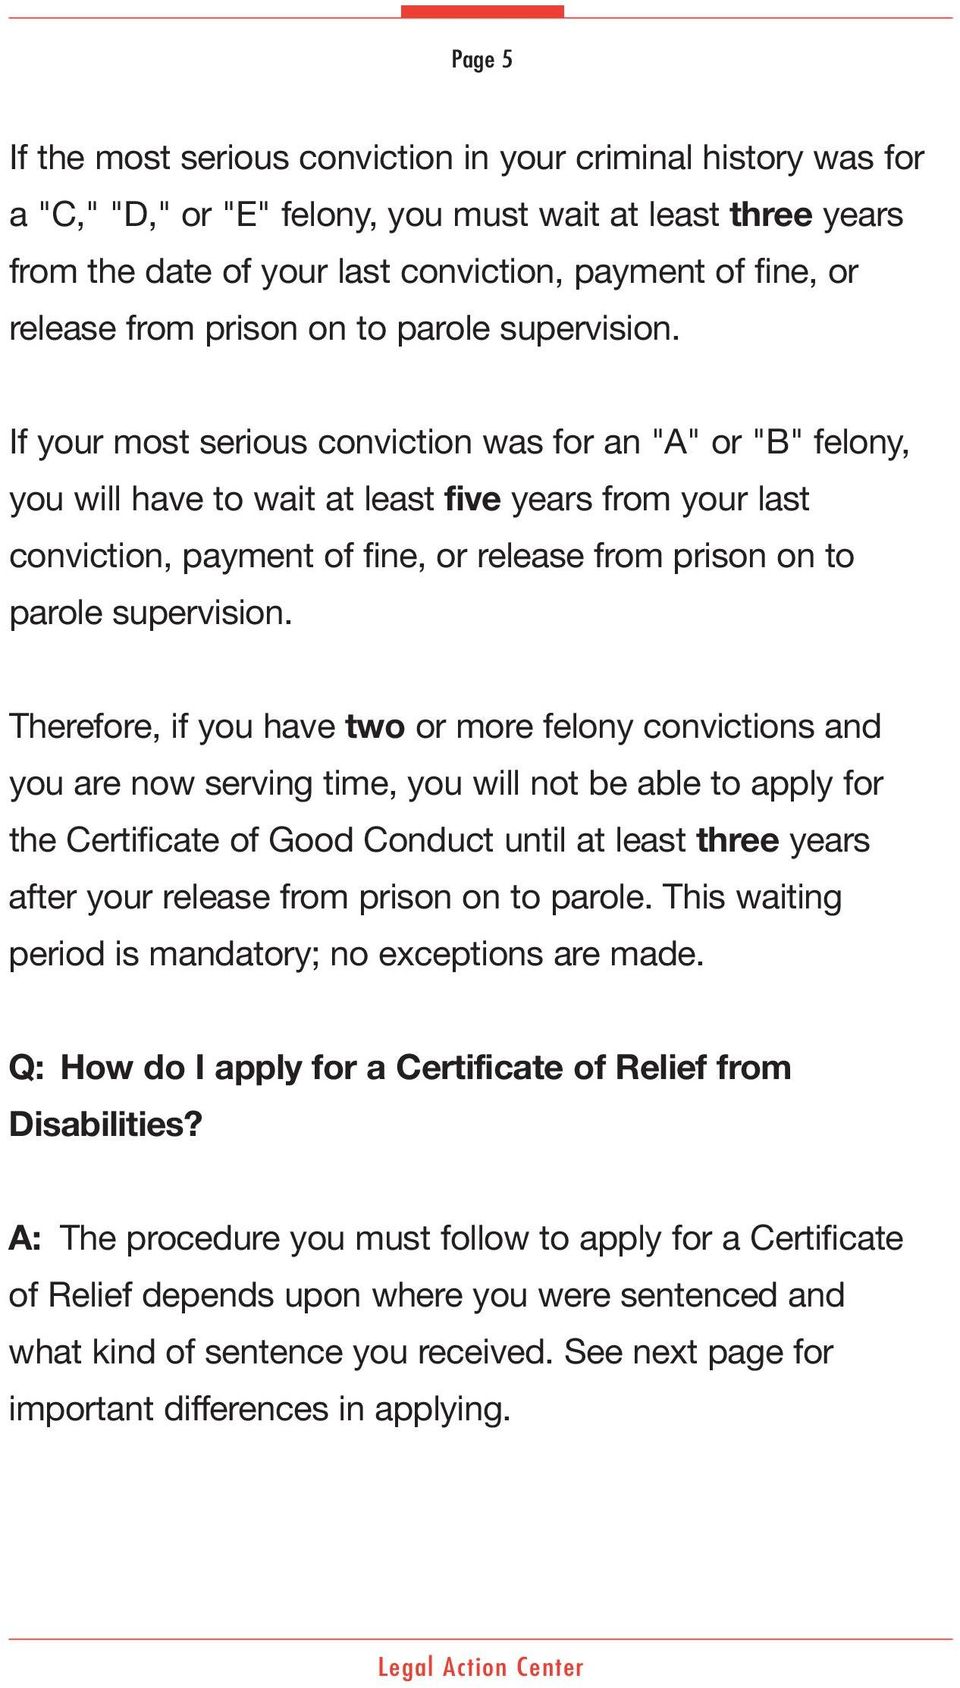 If your most serious conviction was for an "A" or "B" felony, you will have to wait at least five years from your last conviction, payment of fine, or release  Therefore, if you have two or more